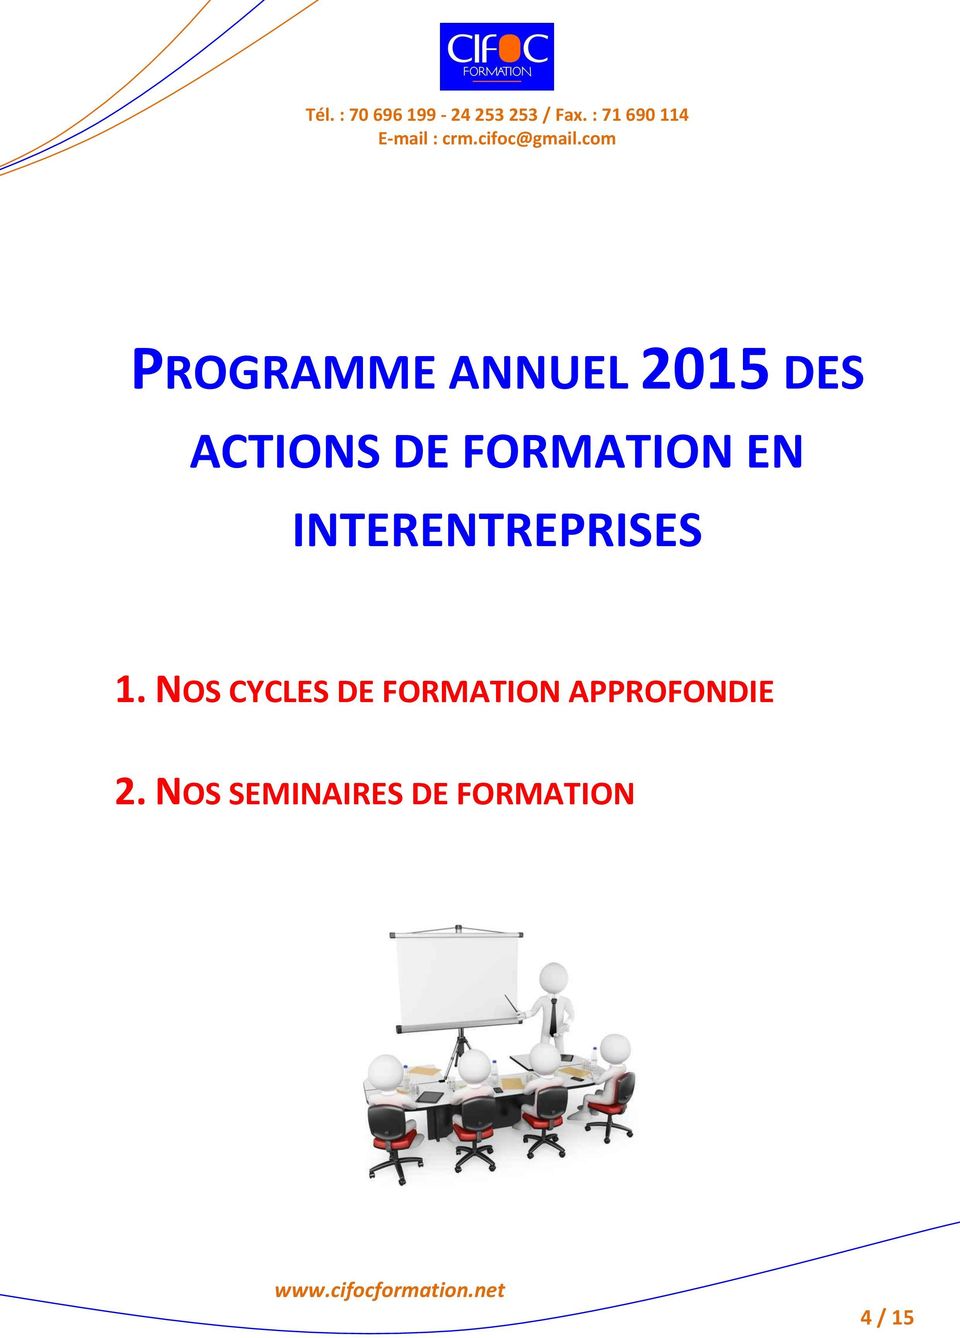 NOS CYCLES DE FORMATION APPROFONDIE